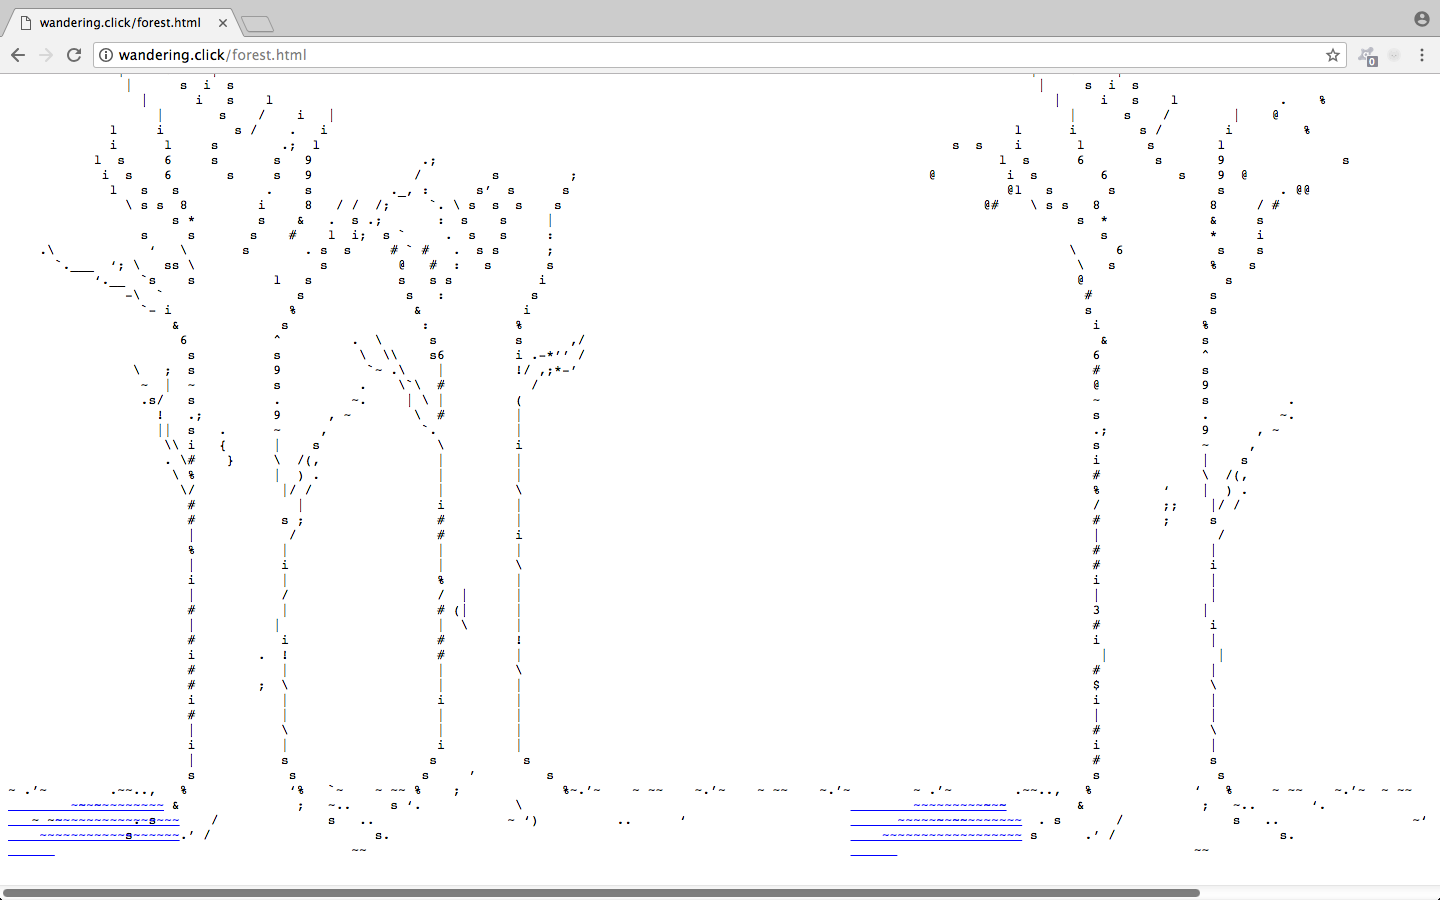 Screenshot of three ASCII trees growing out of the ground. Their shadows are blue underlined hyperlinks